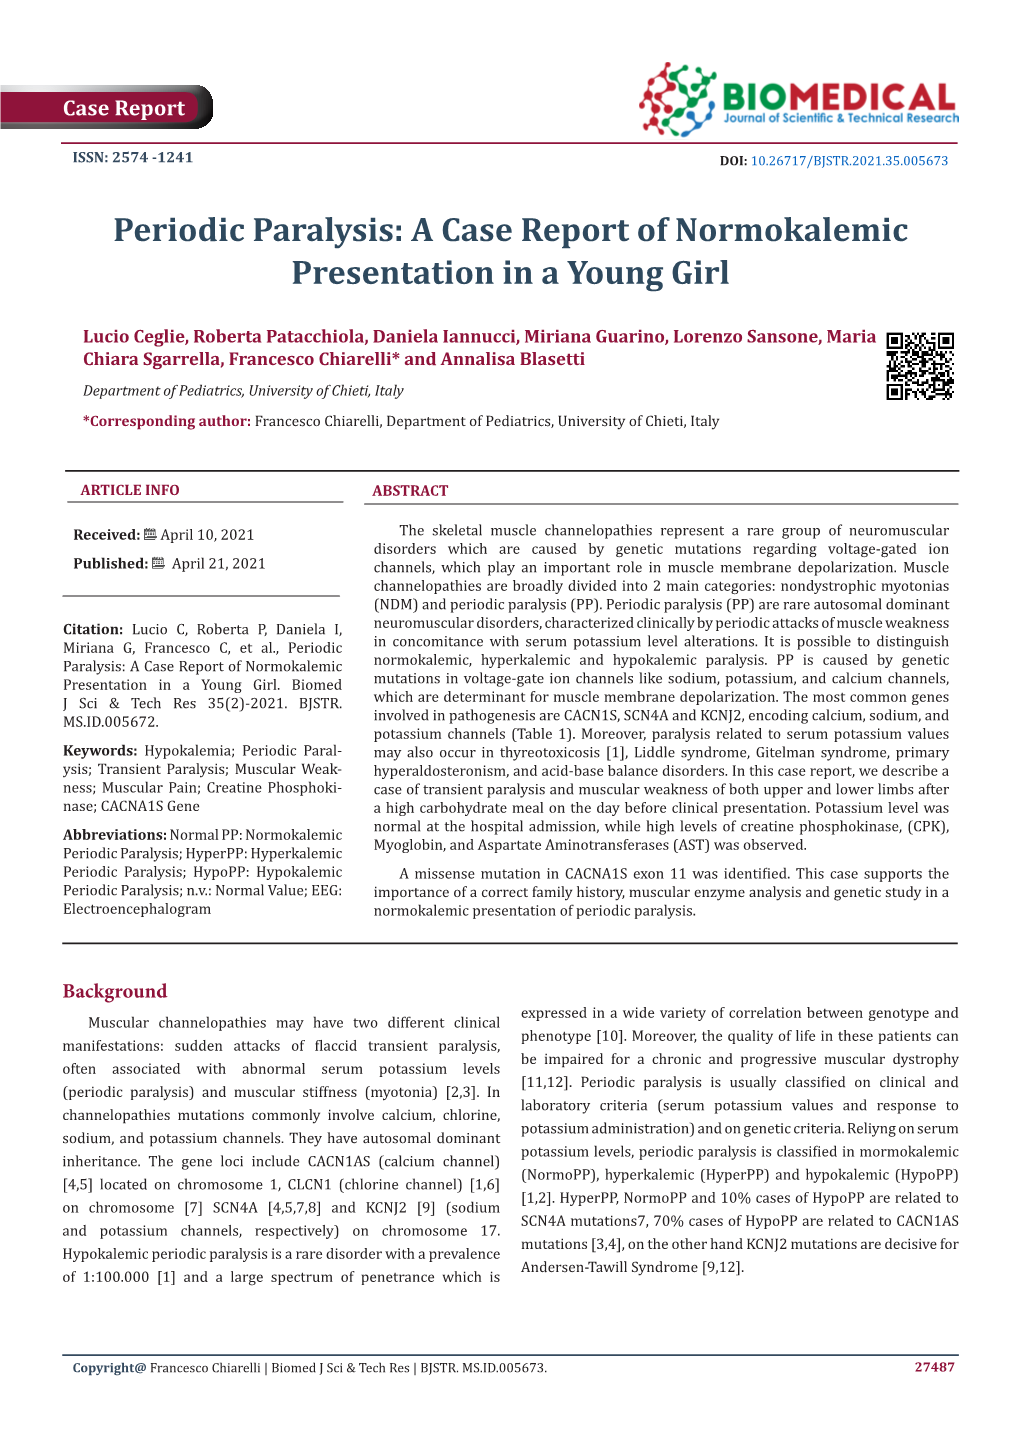 Periodic Paralysis: a Case Report of Normokalemic Presentation in a Young Girl